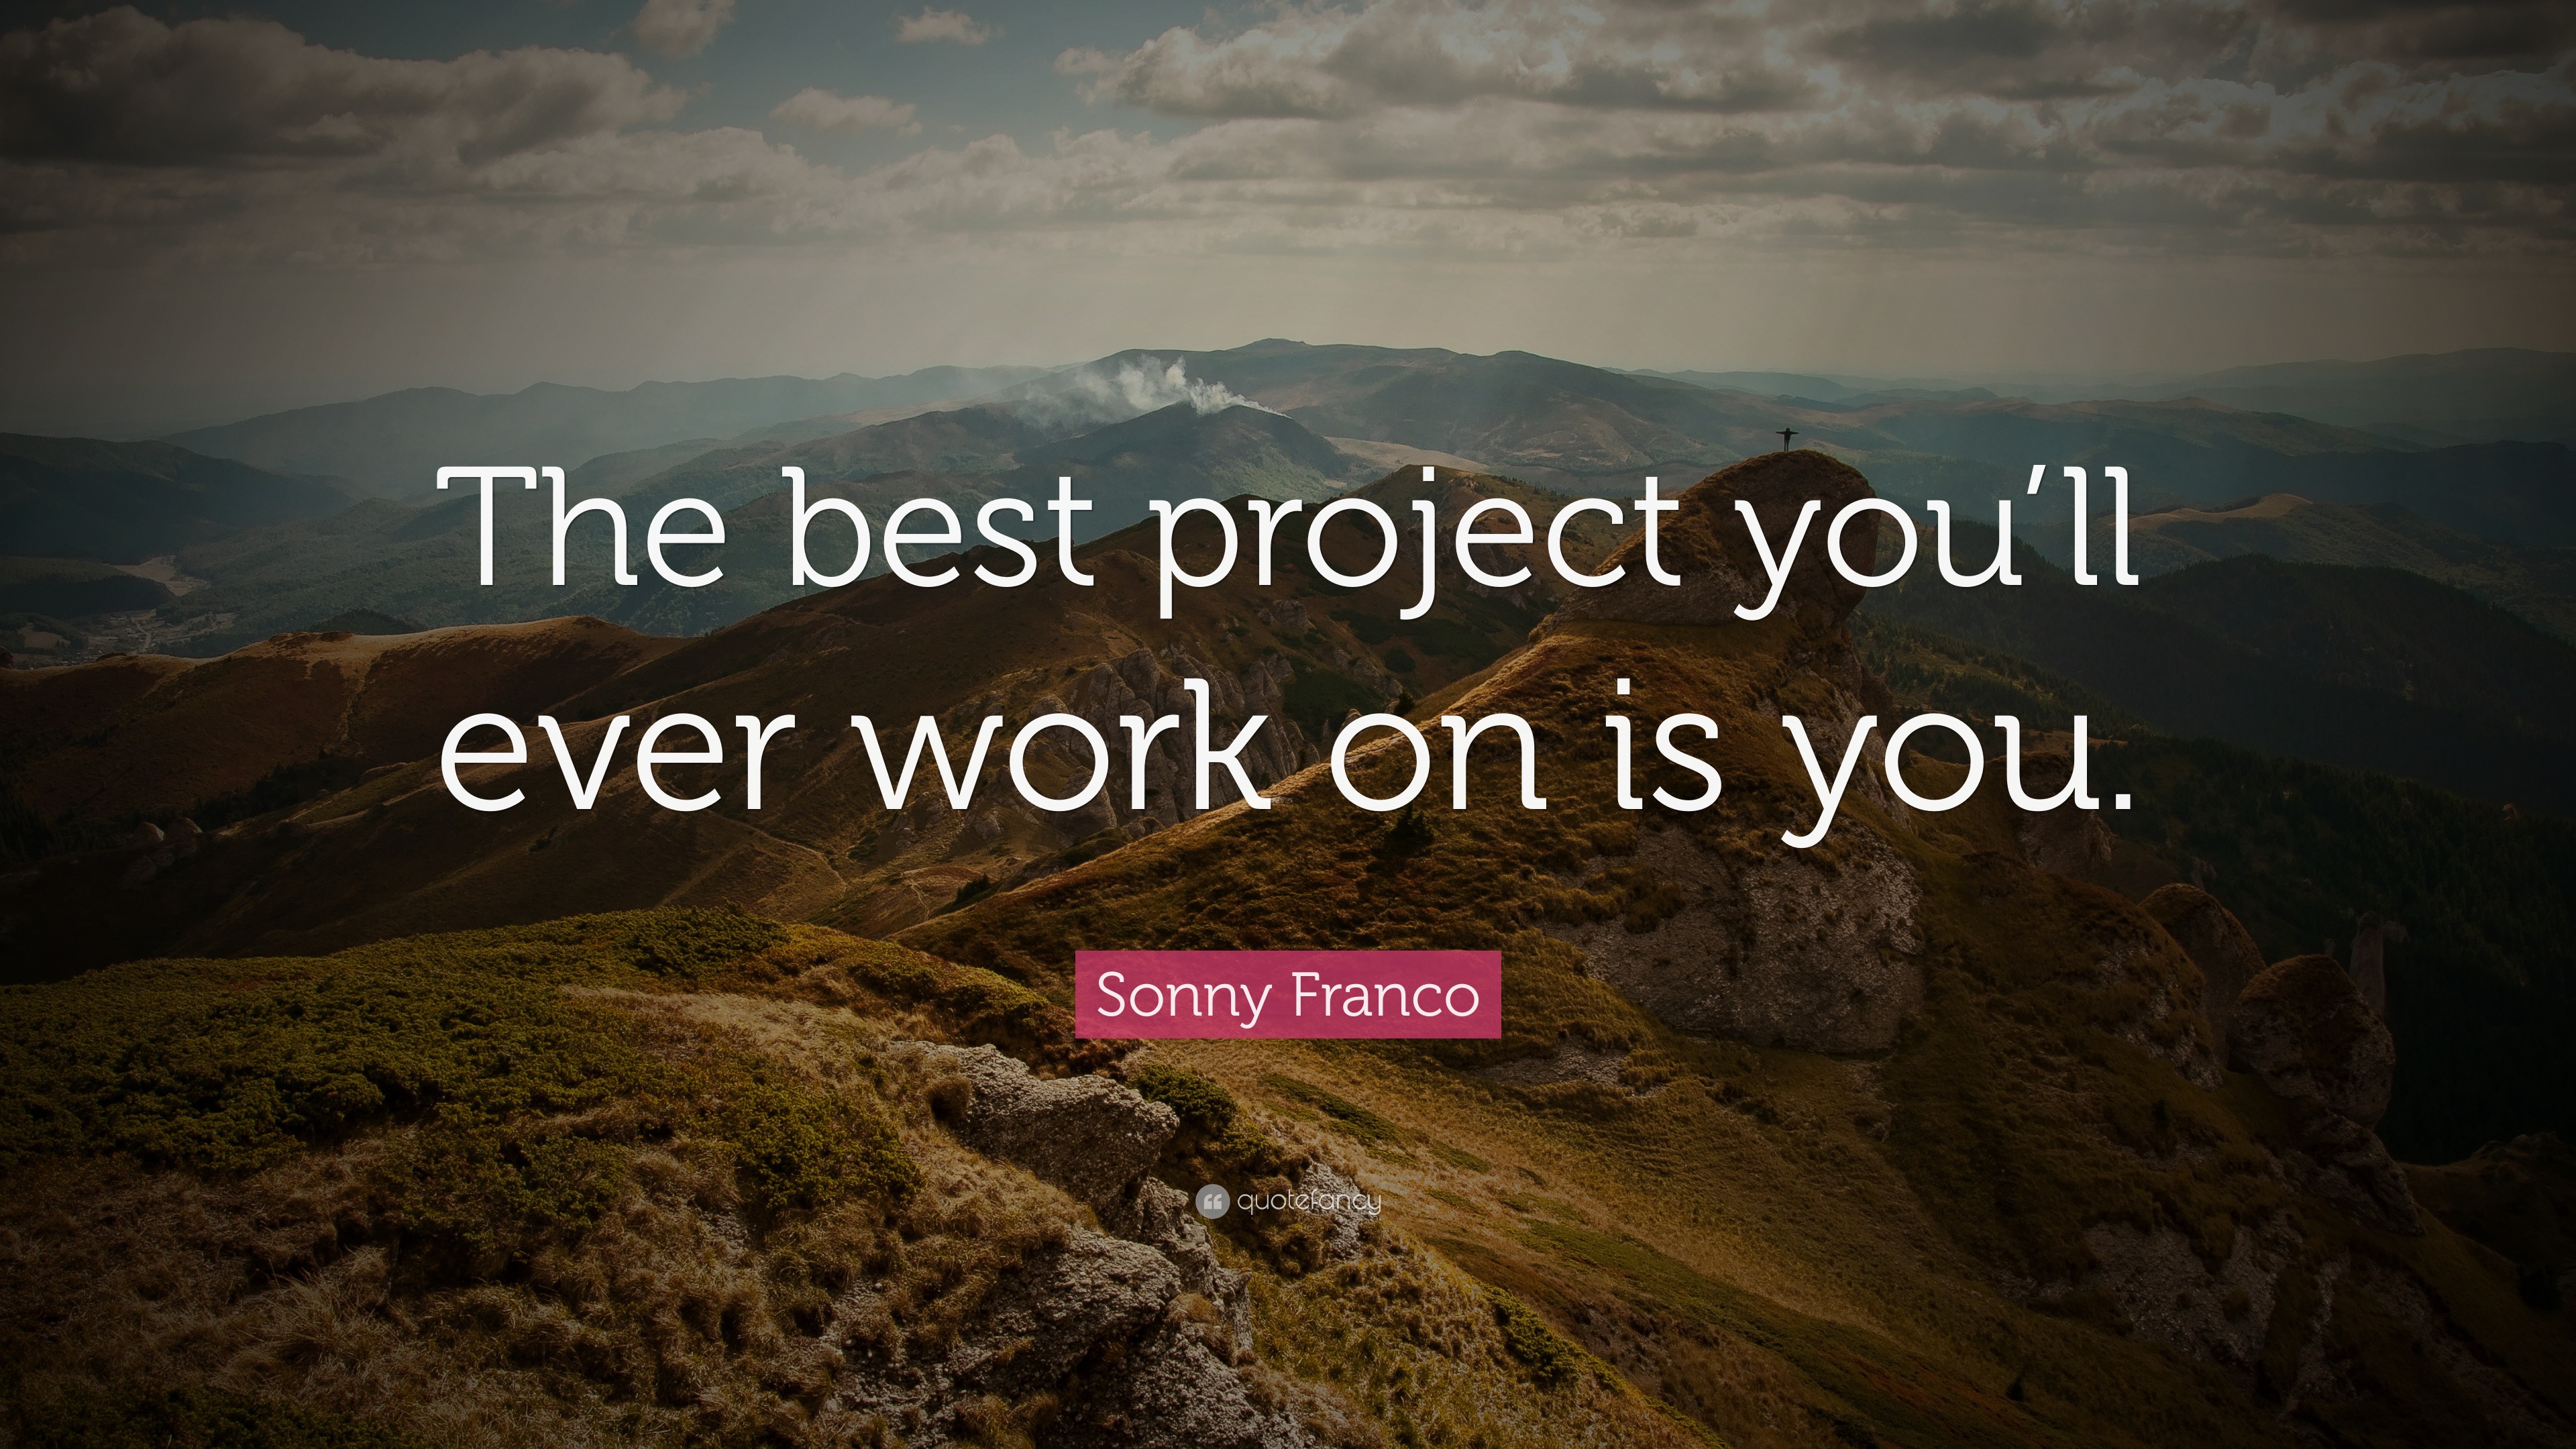 Sonny Franco Quote: “The best project you’ll ever work on is you.” (43